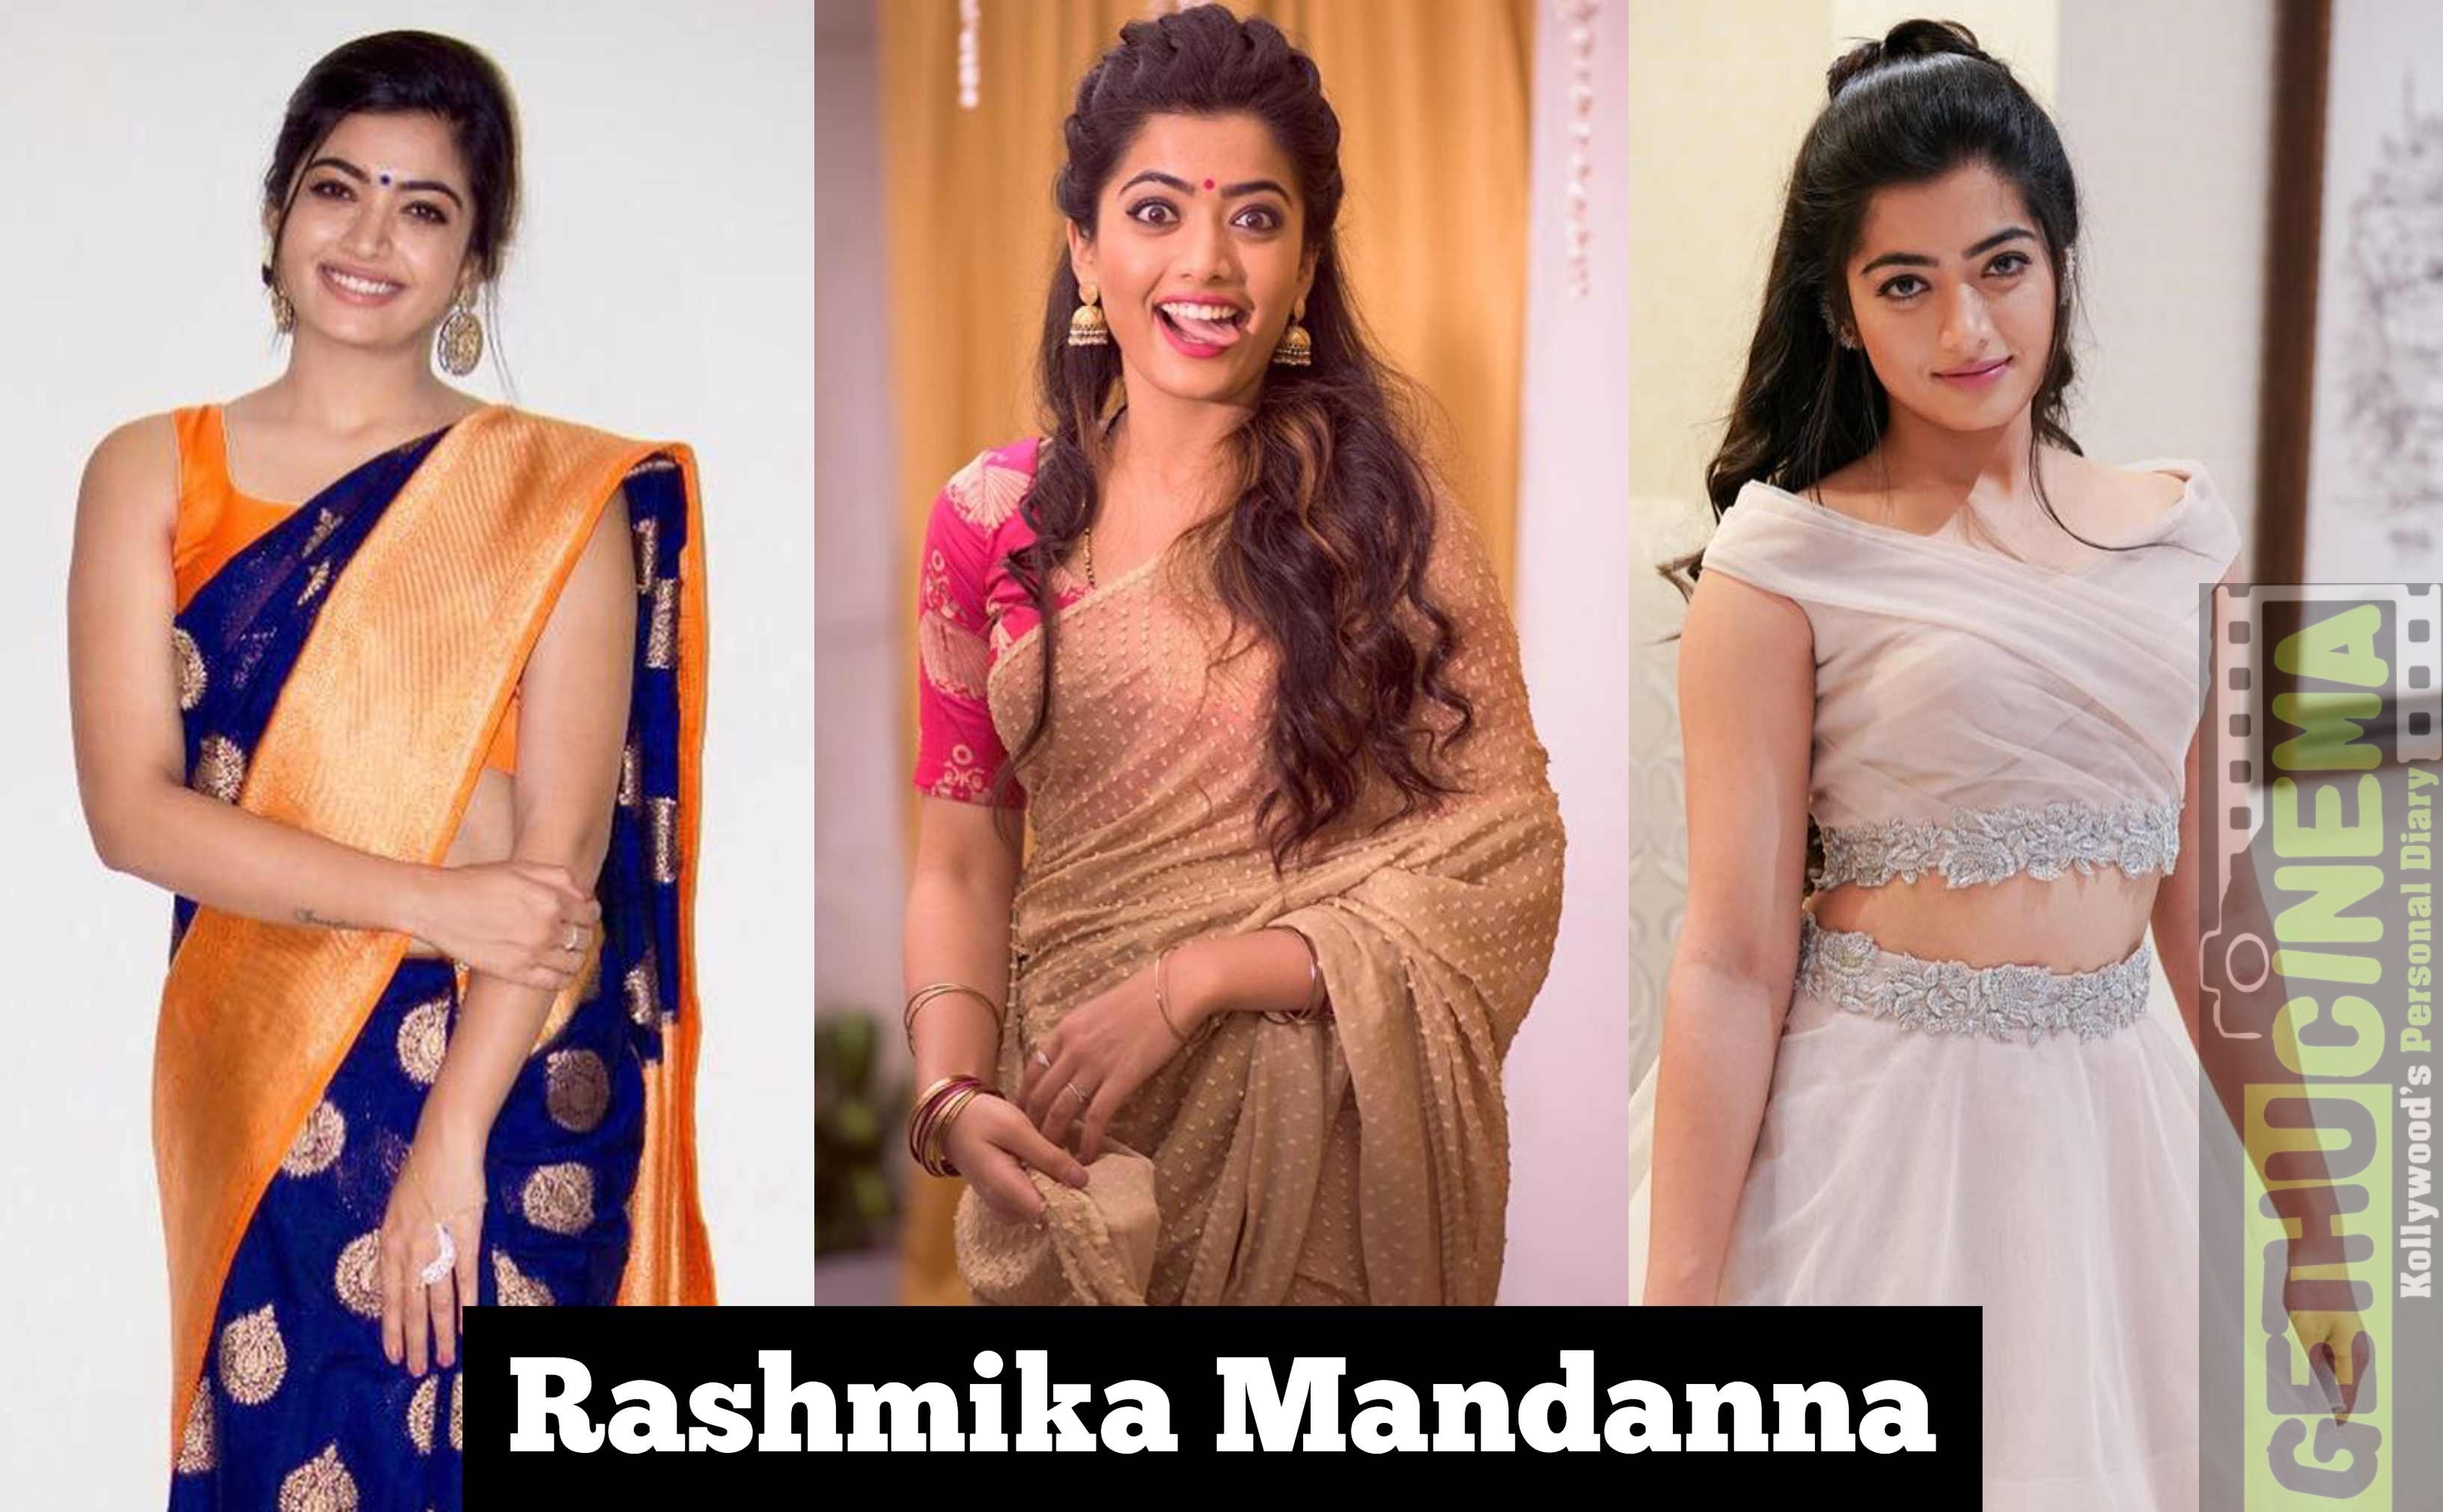 Rashmika Mandanna: 'I don't want to be categorised as an actor'